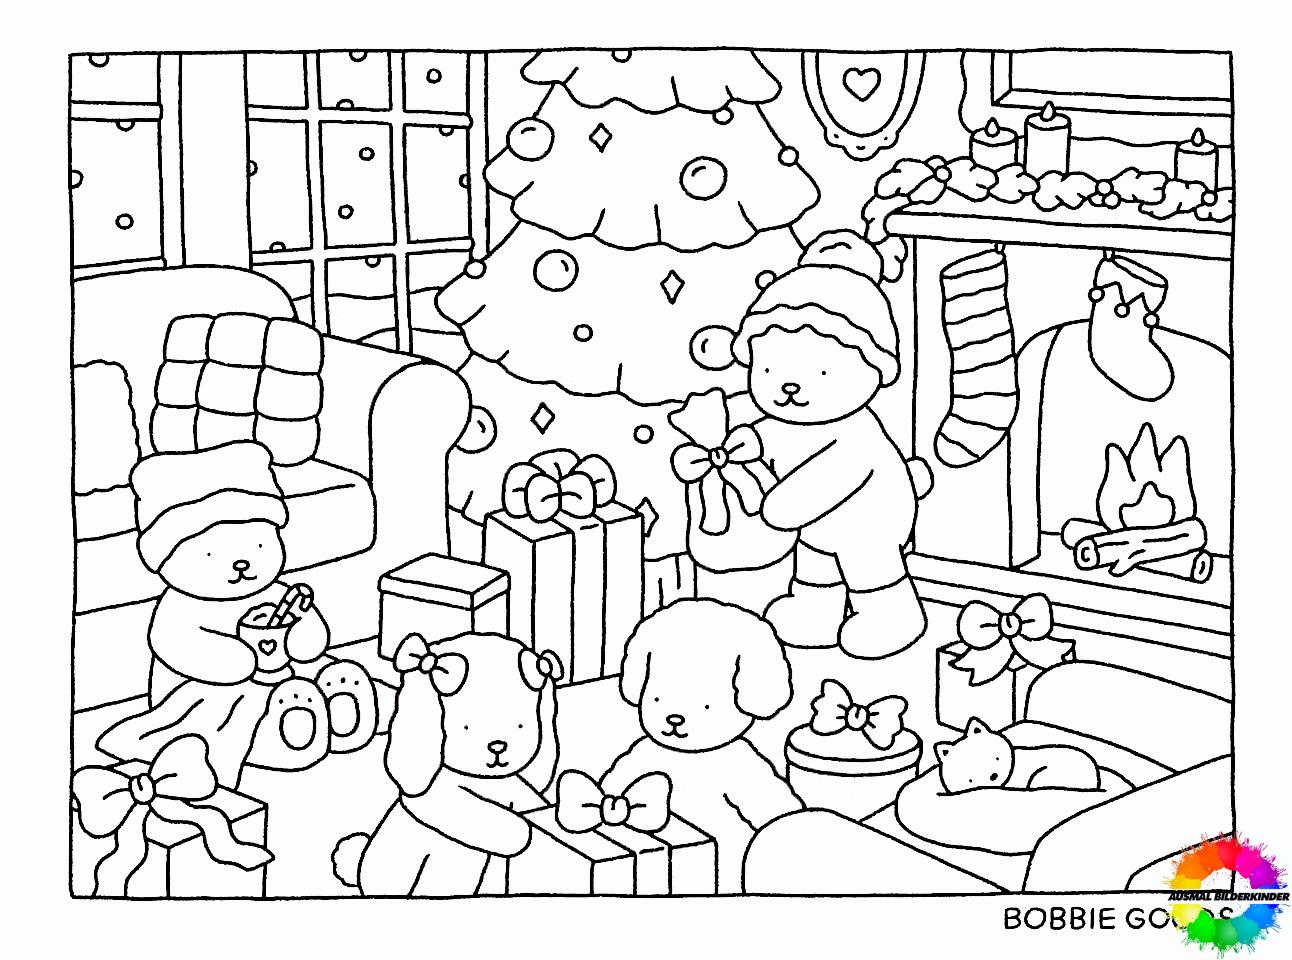 Bobbie Goods  Hello kitty colouring pages, Bear coloring pages